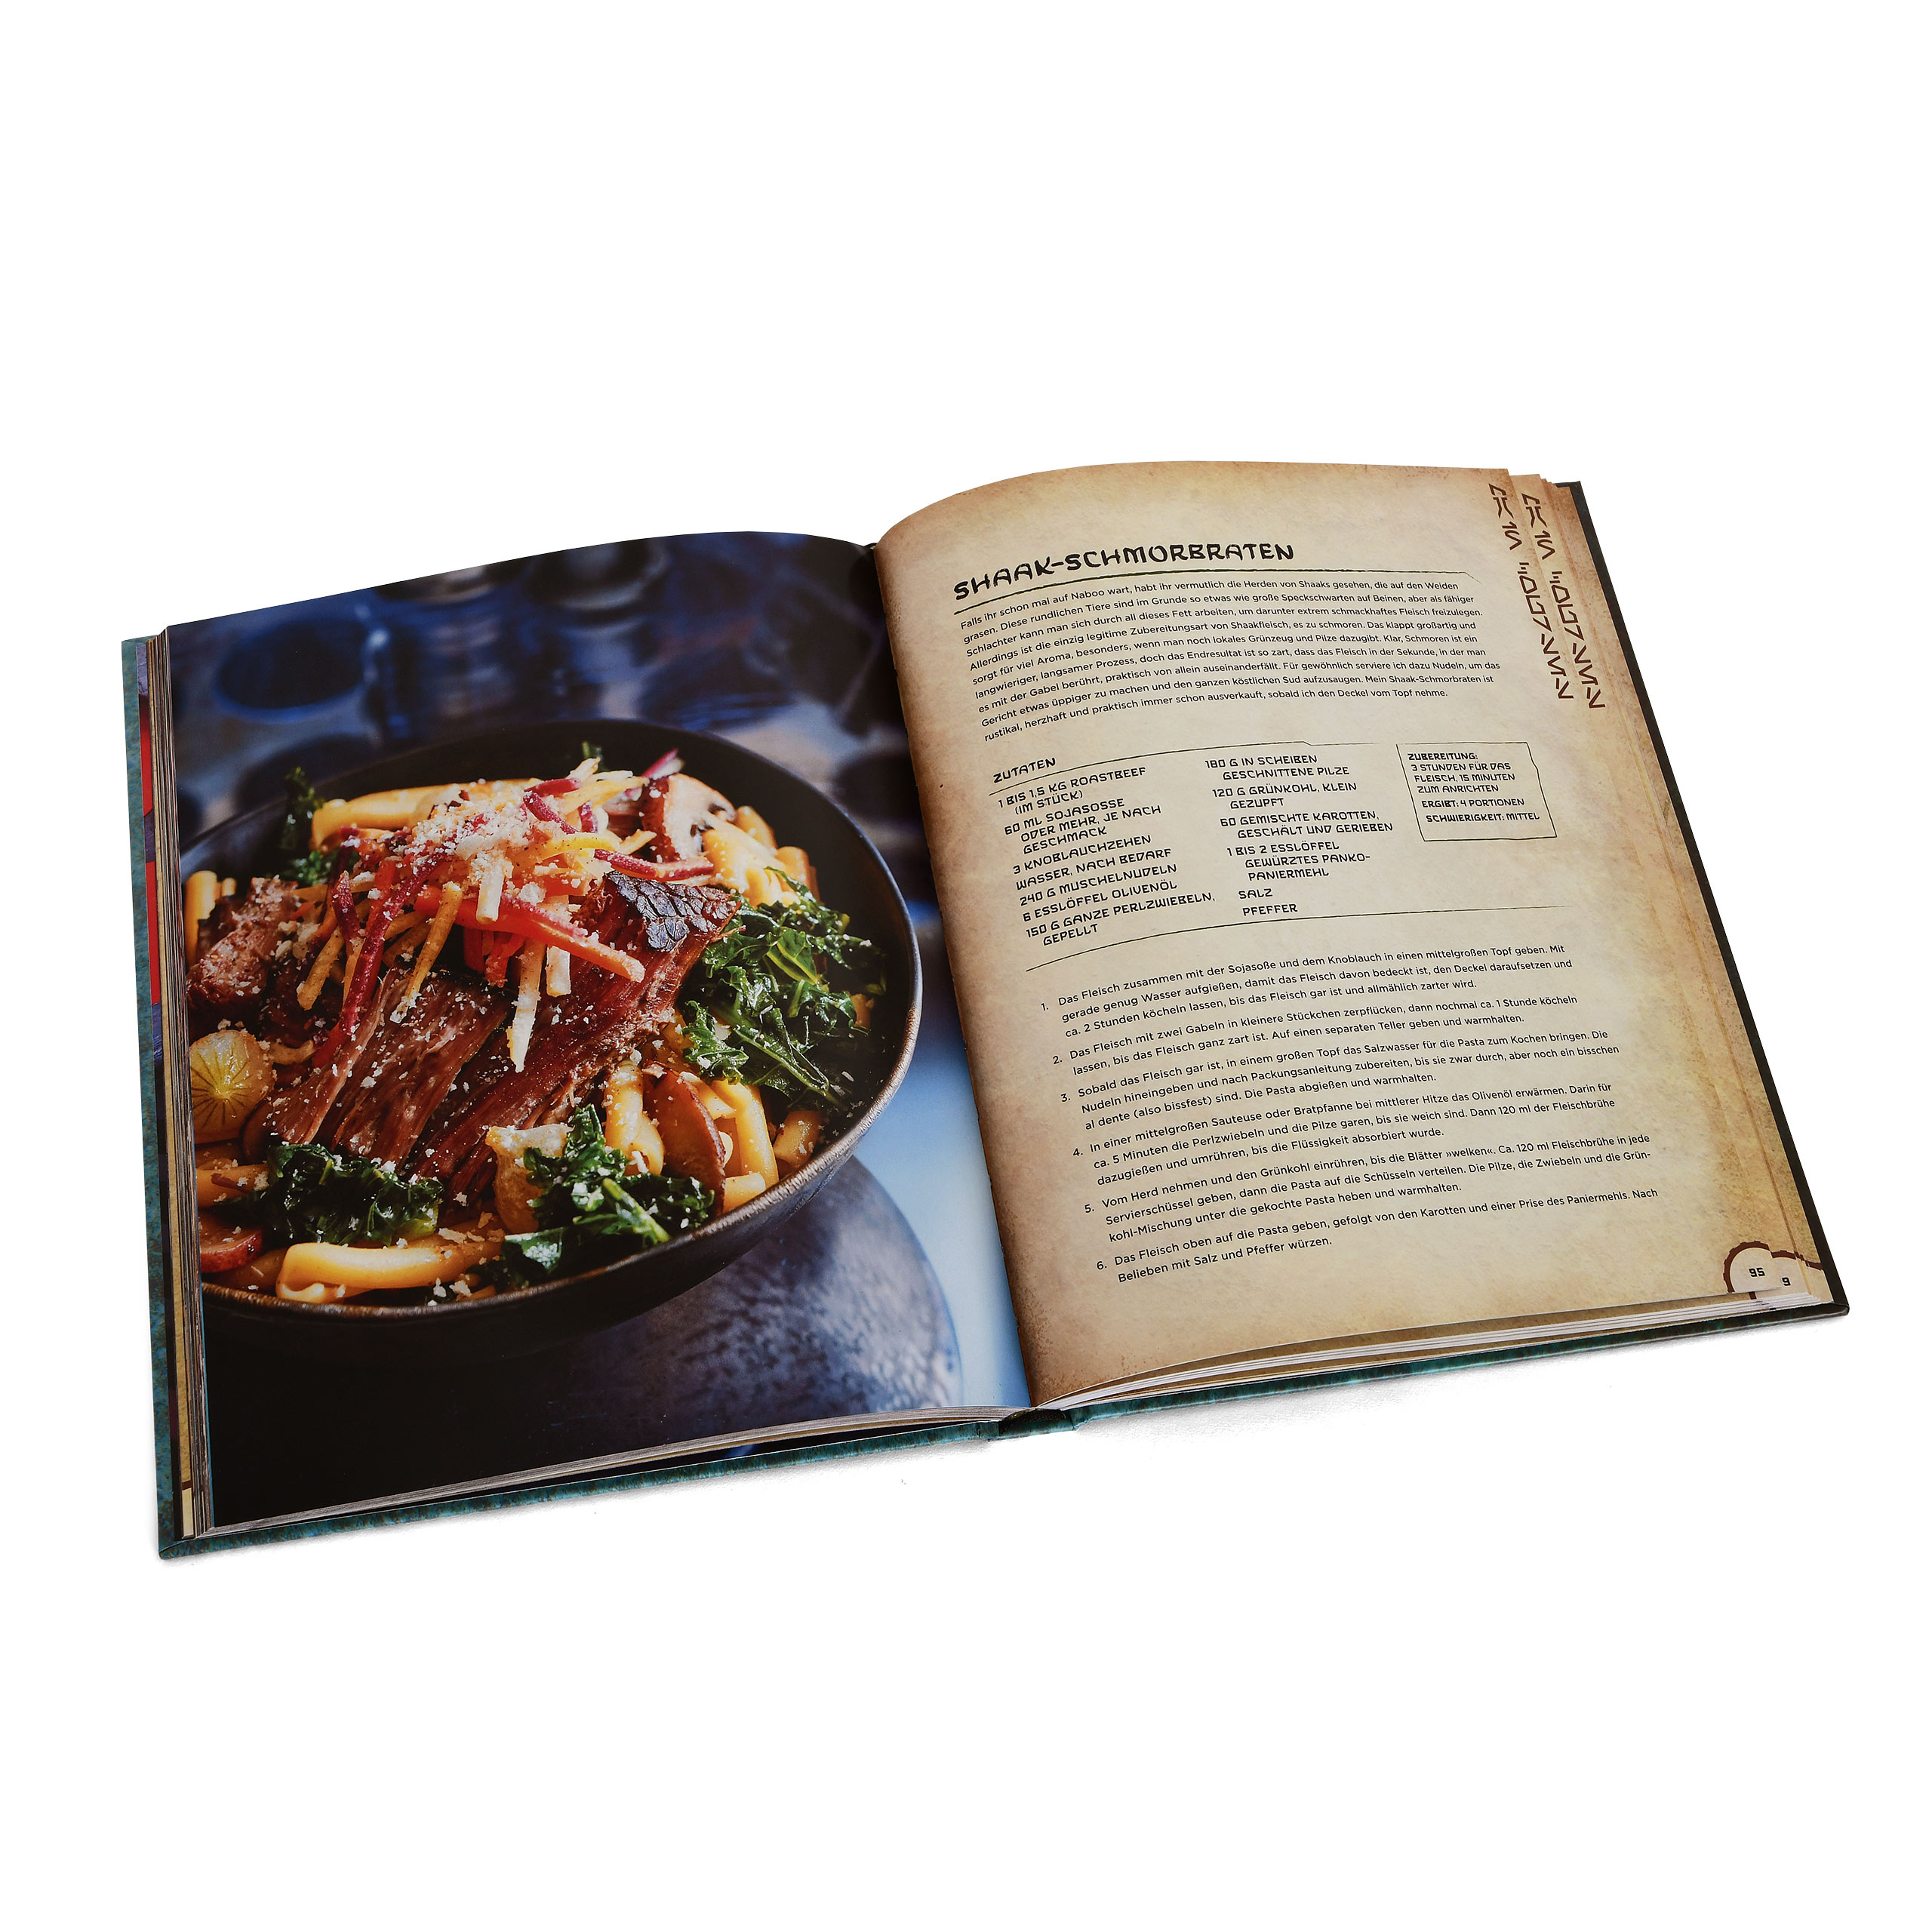 Star Wars - Galaxy's Edge The official cookbook of the Black Spire Outpost